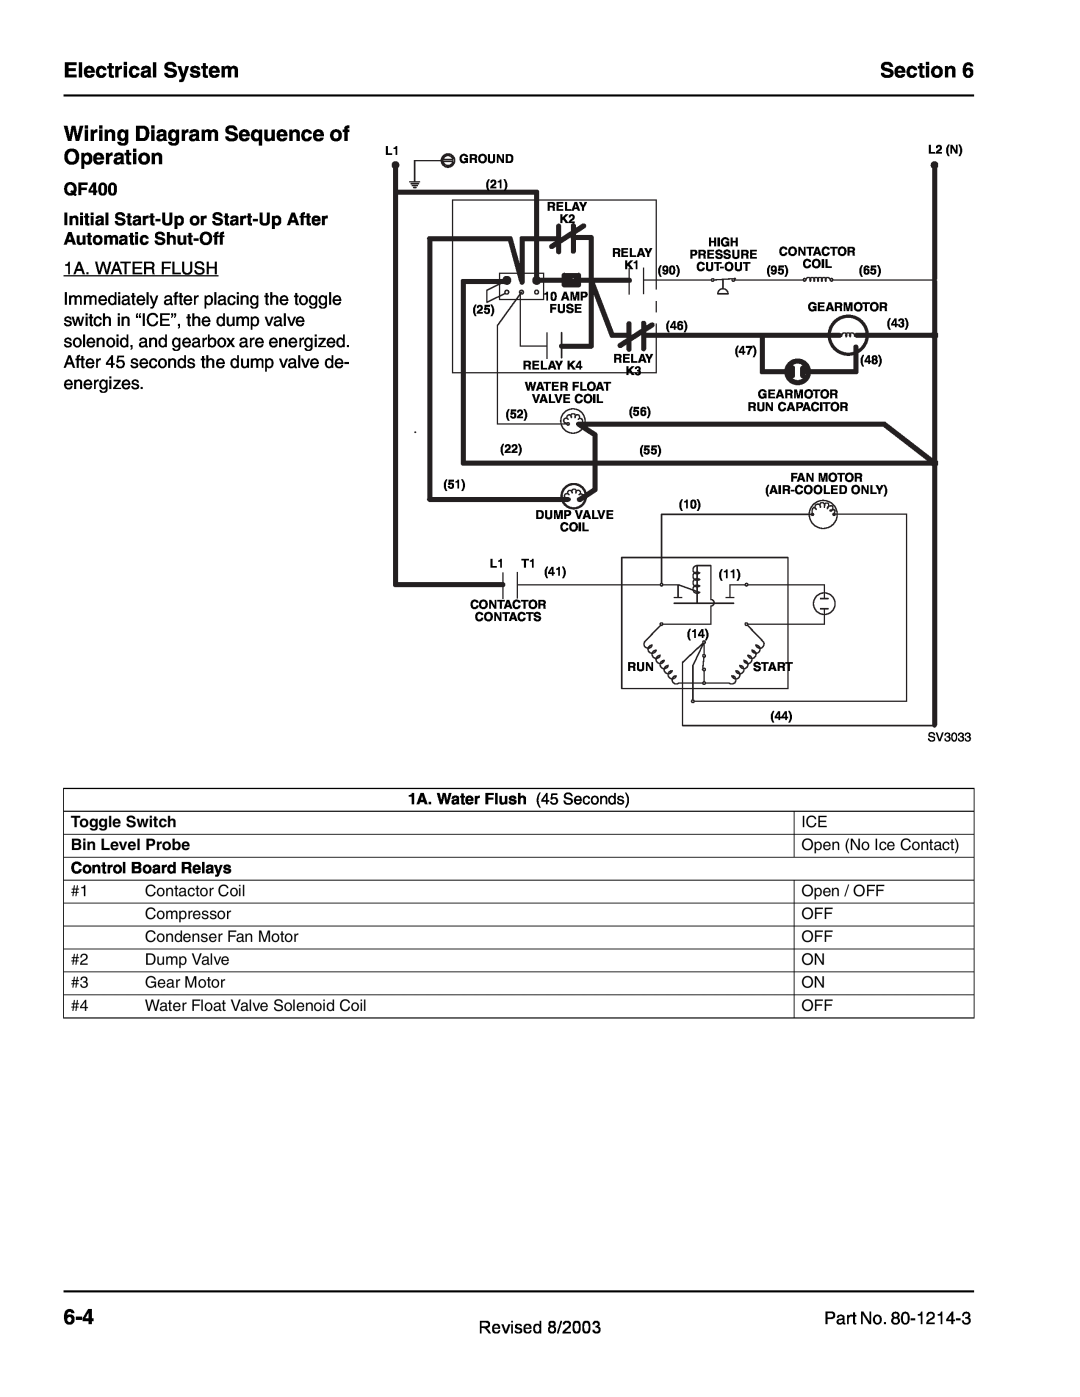 Manitowoc Ice QF0800, QF2300, QC0700, QF0400 Electrical System, Section, Wiring Diagram Sequence of OperationL1, QF400 